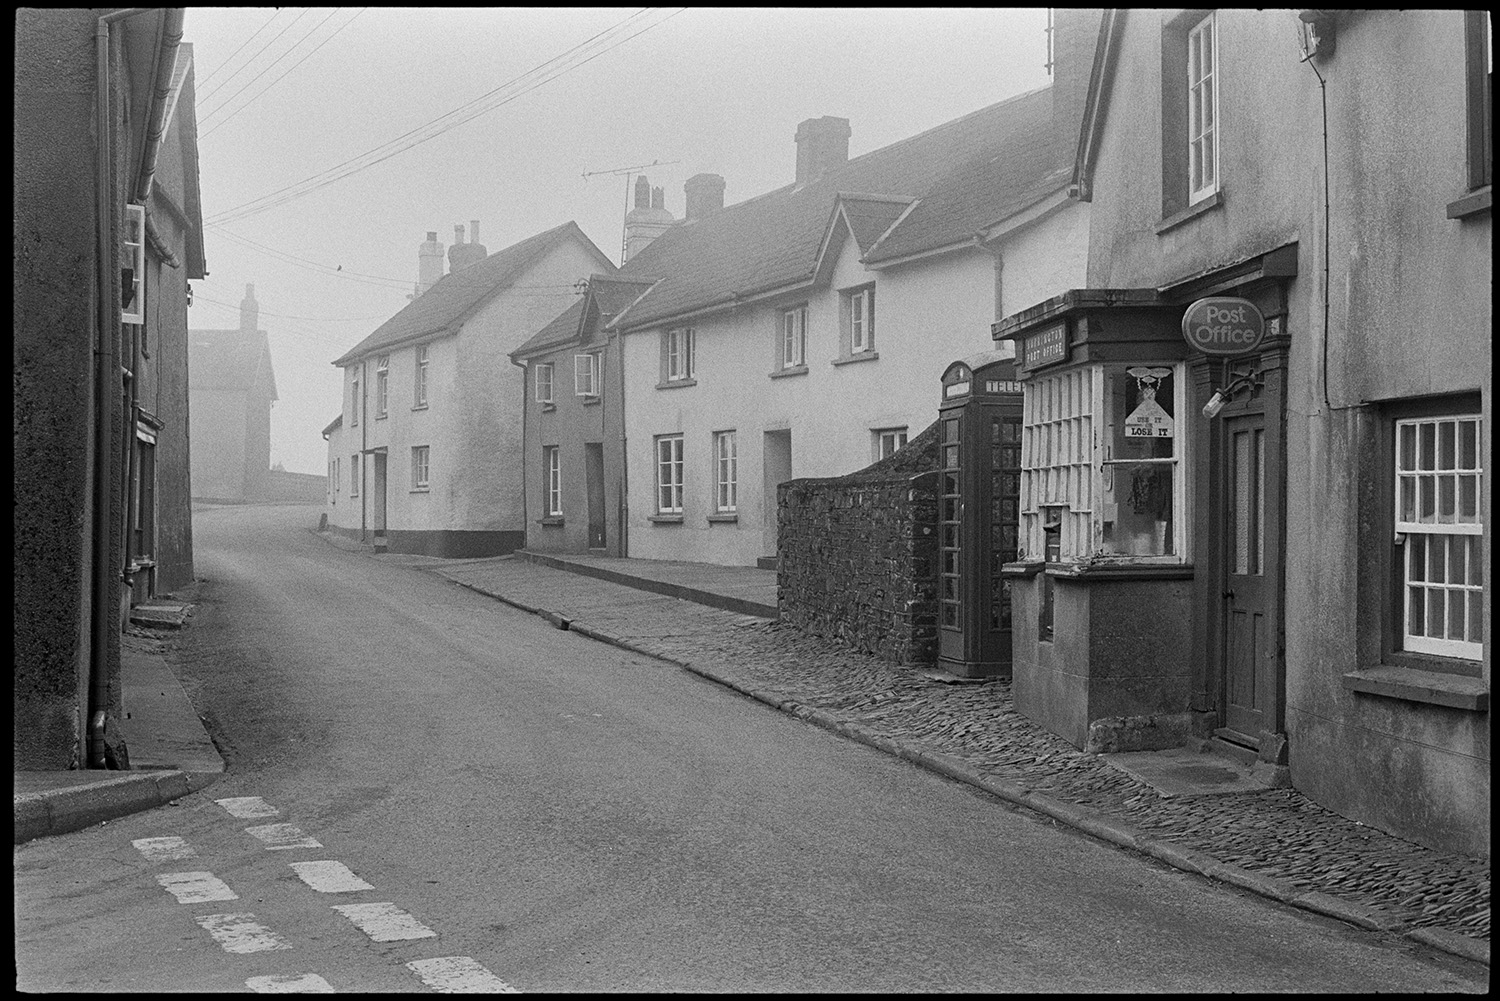 Street scene, early morning passers by, men chatting, front of Post Office, cobbles. 
[The street outside Burrington Post Office and telephone box in the early morning. The pavement outside the Post Office is cobbled.]